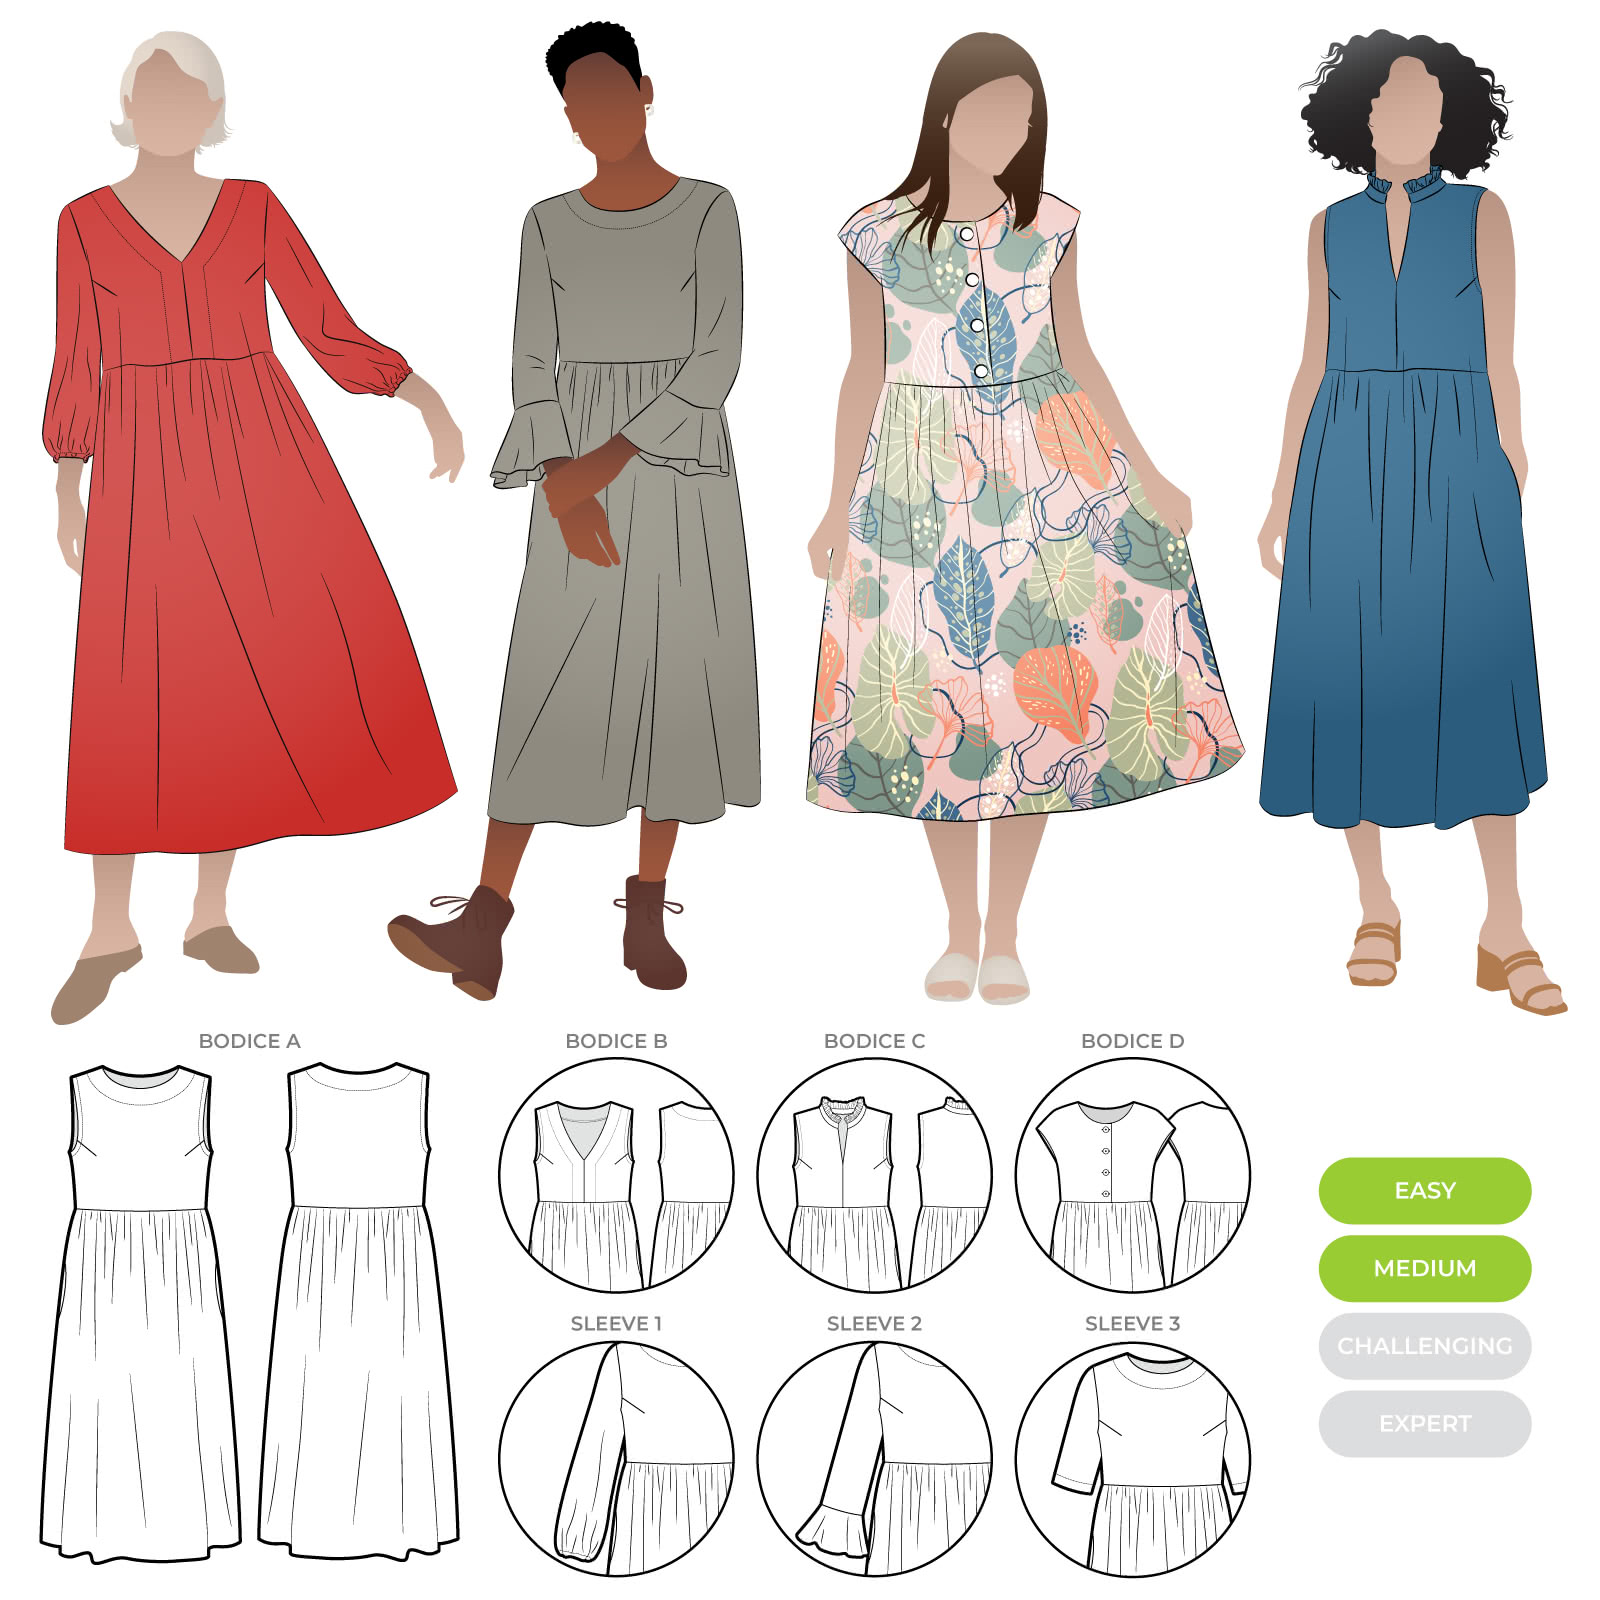 Montana Dress Extension Pack By Style Arc - Change up your Montana Midi Dress with these additional pattern pieces. You will receive 4 bodice and 3 sleeve pattern options designed to match the skirt of the original Montana Midi Dress pattern, creating over 12 different looks. You will also need the original Montana Midi Dress pattern to use this extension pack.